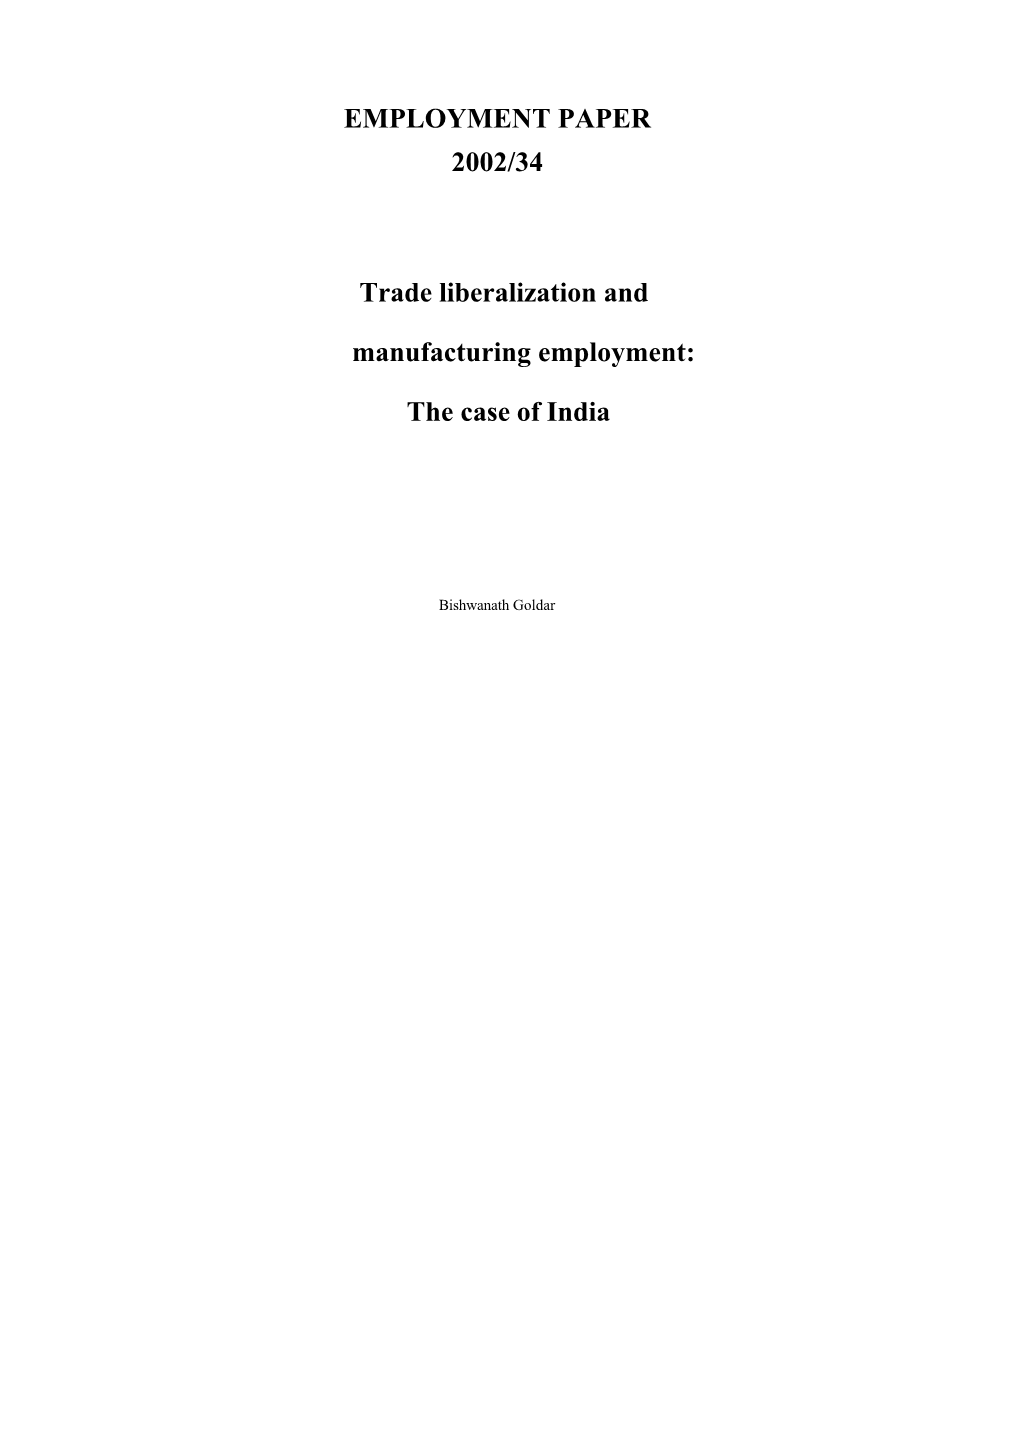 Trade Liberalization and Manufacturing Employment